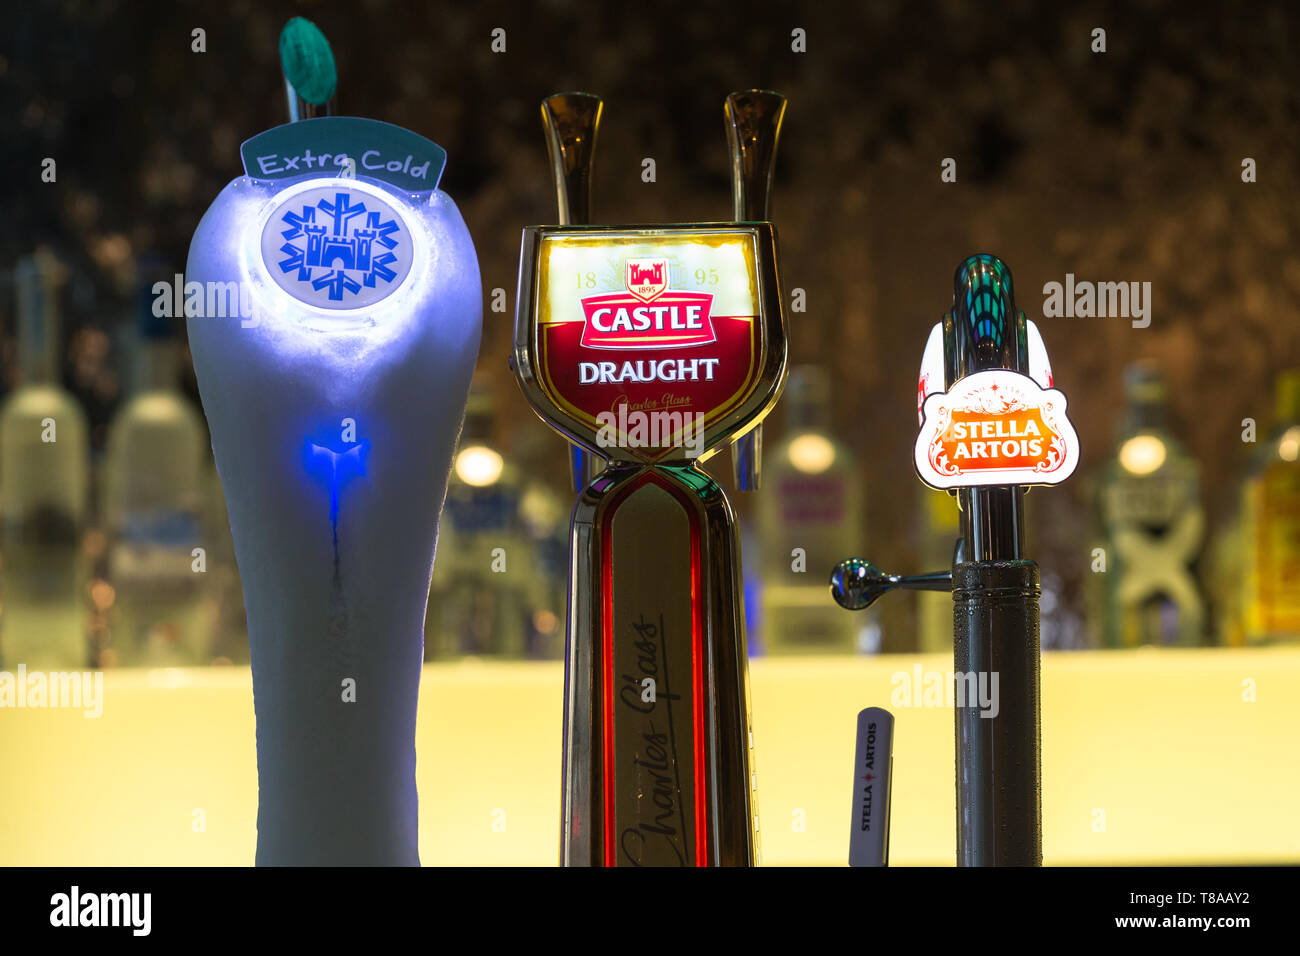 close up of illuminated draught beer taps or faucets for Castle and Stella Artois brands on a bar counter top in a hotel in Cape Town, South Africa Stock Photo